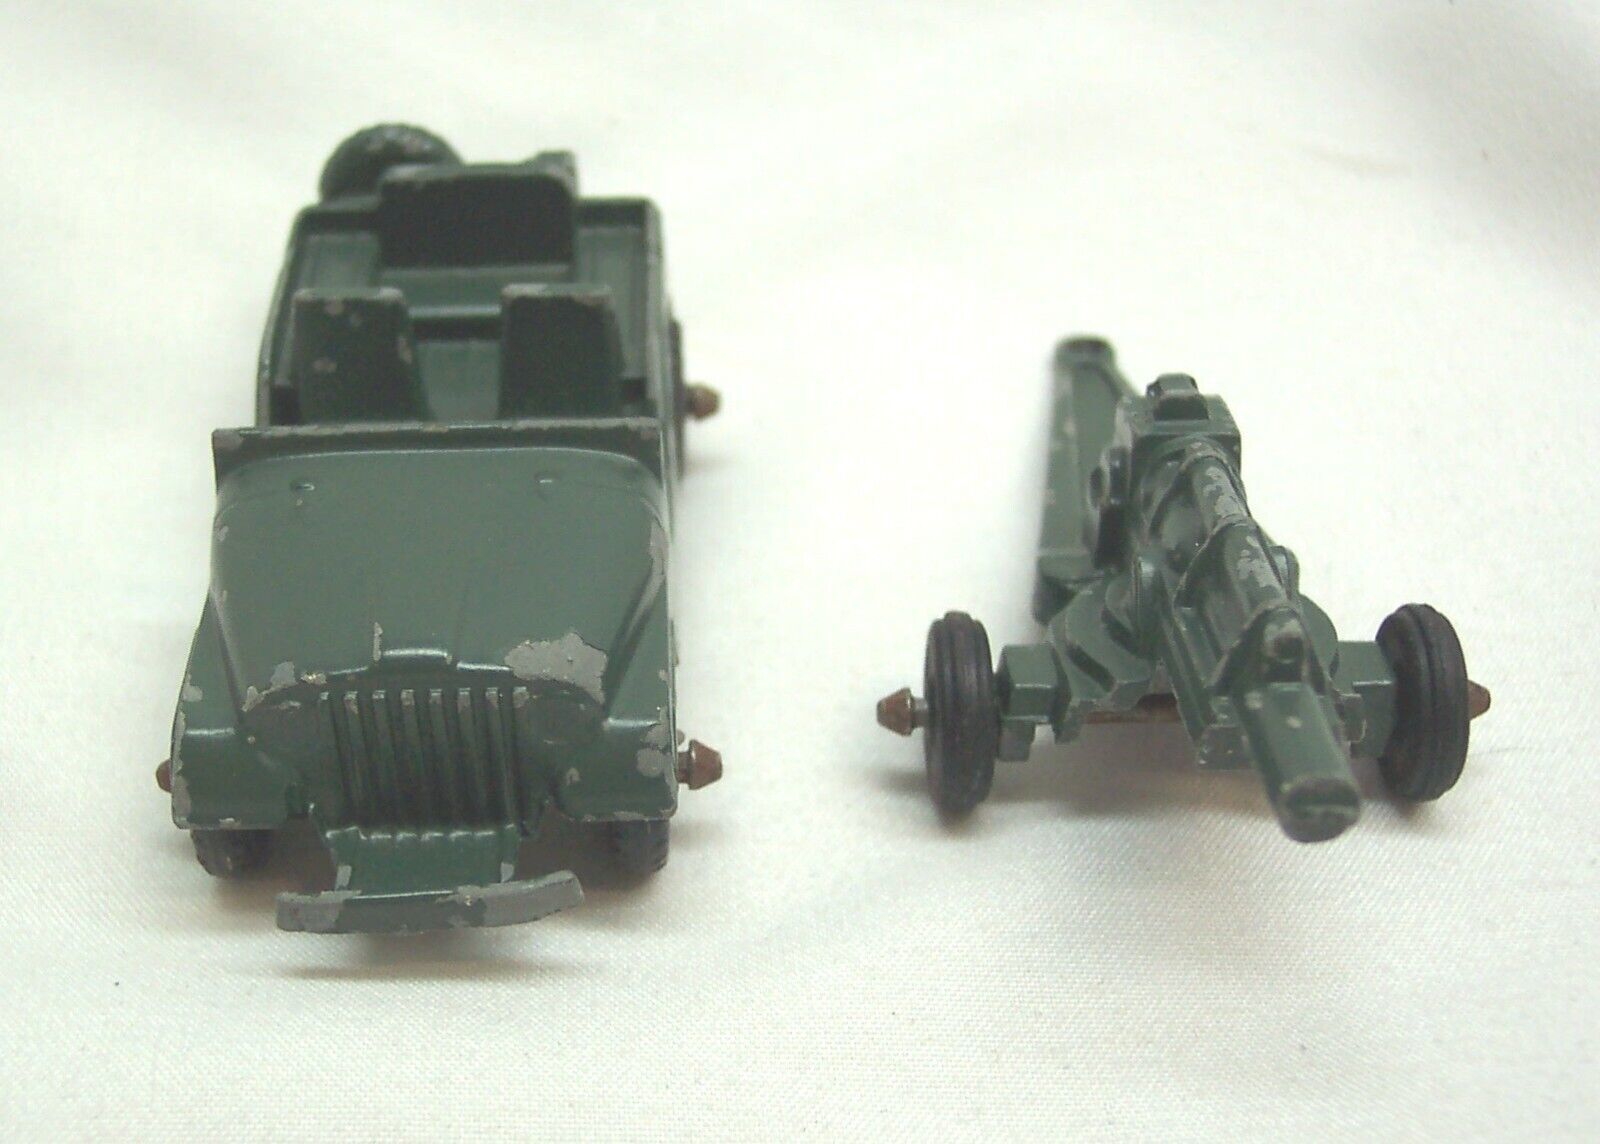 Primary image for Antique 1950's  Army JEEP Truck with 155 MM HOWIZER CANNON Gun Midgetoy Metal